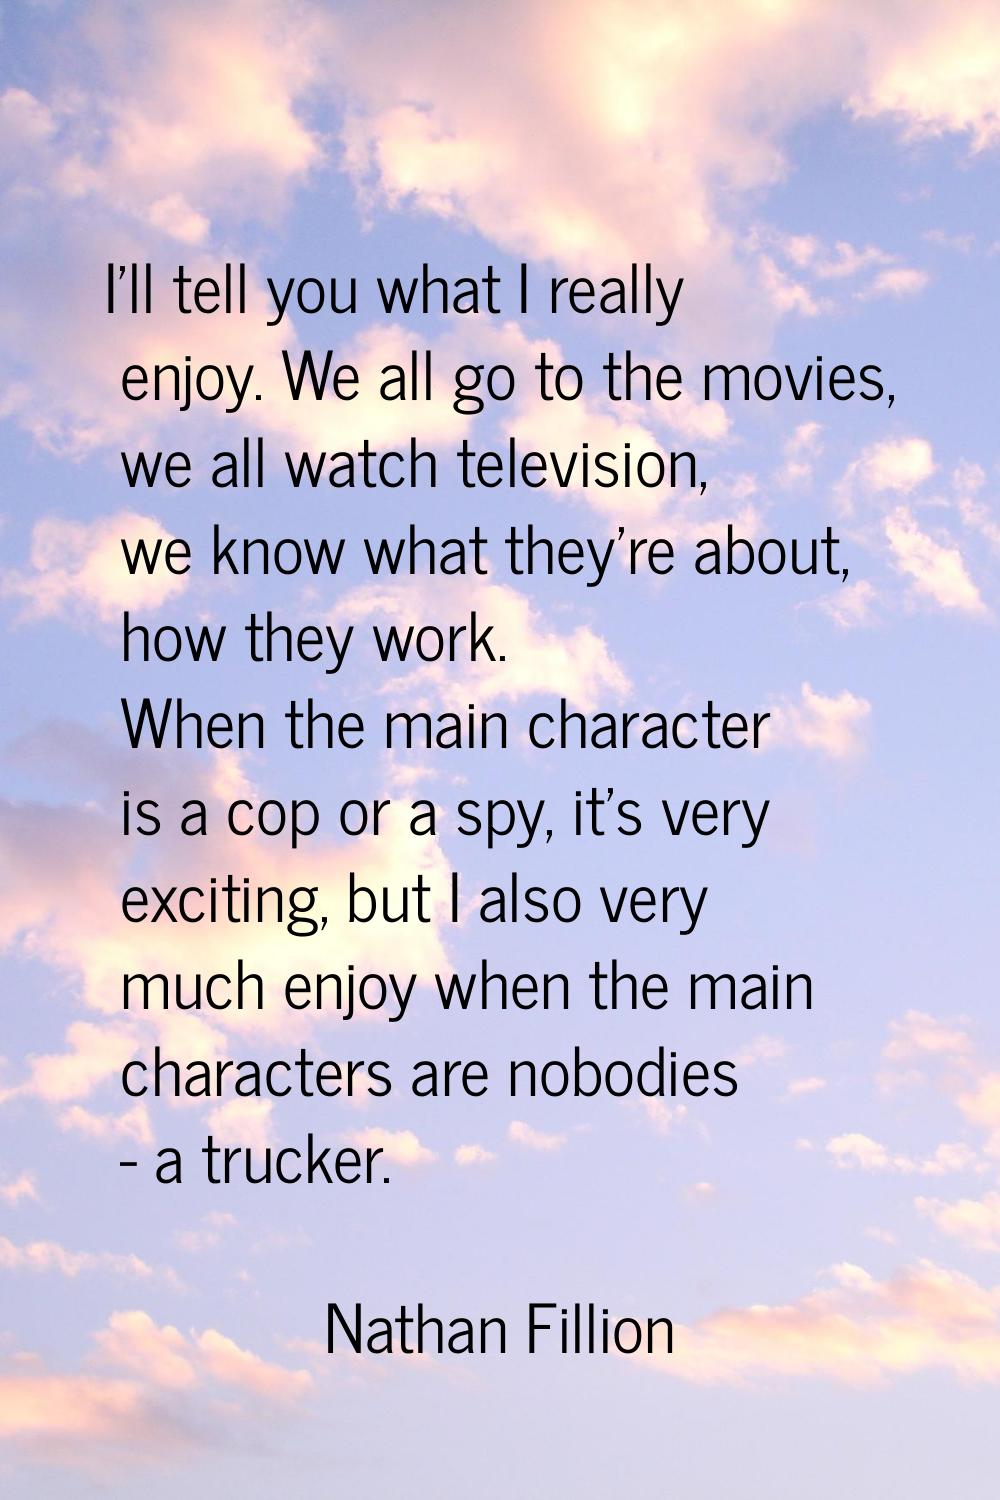 I'll tell you what I really enjoy. We all go to the movies, we all watch television, we know what t